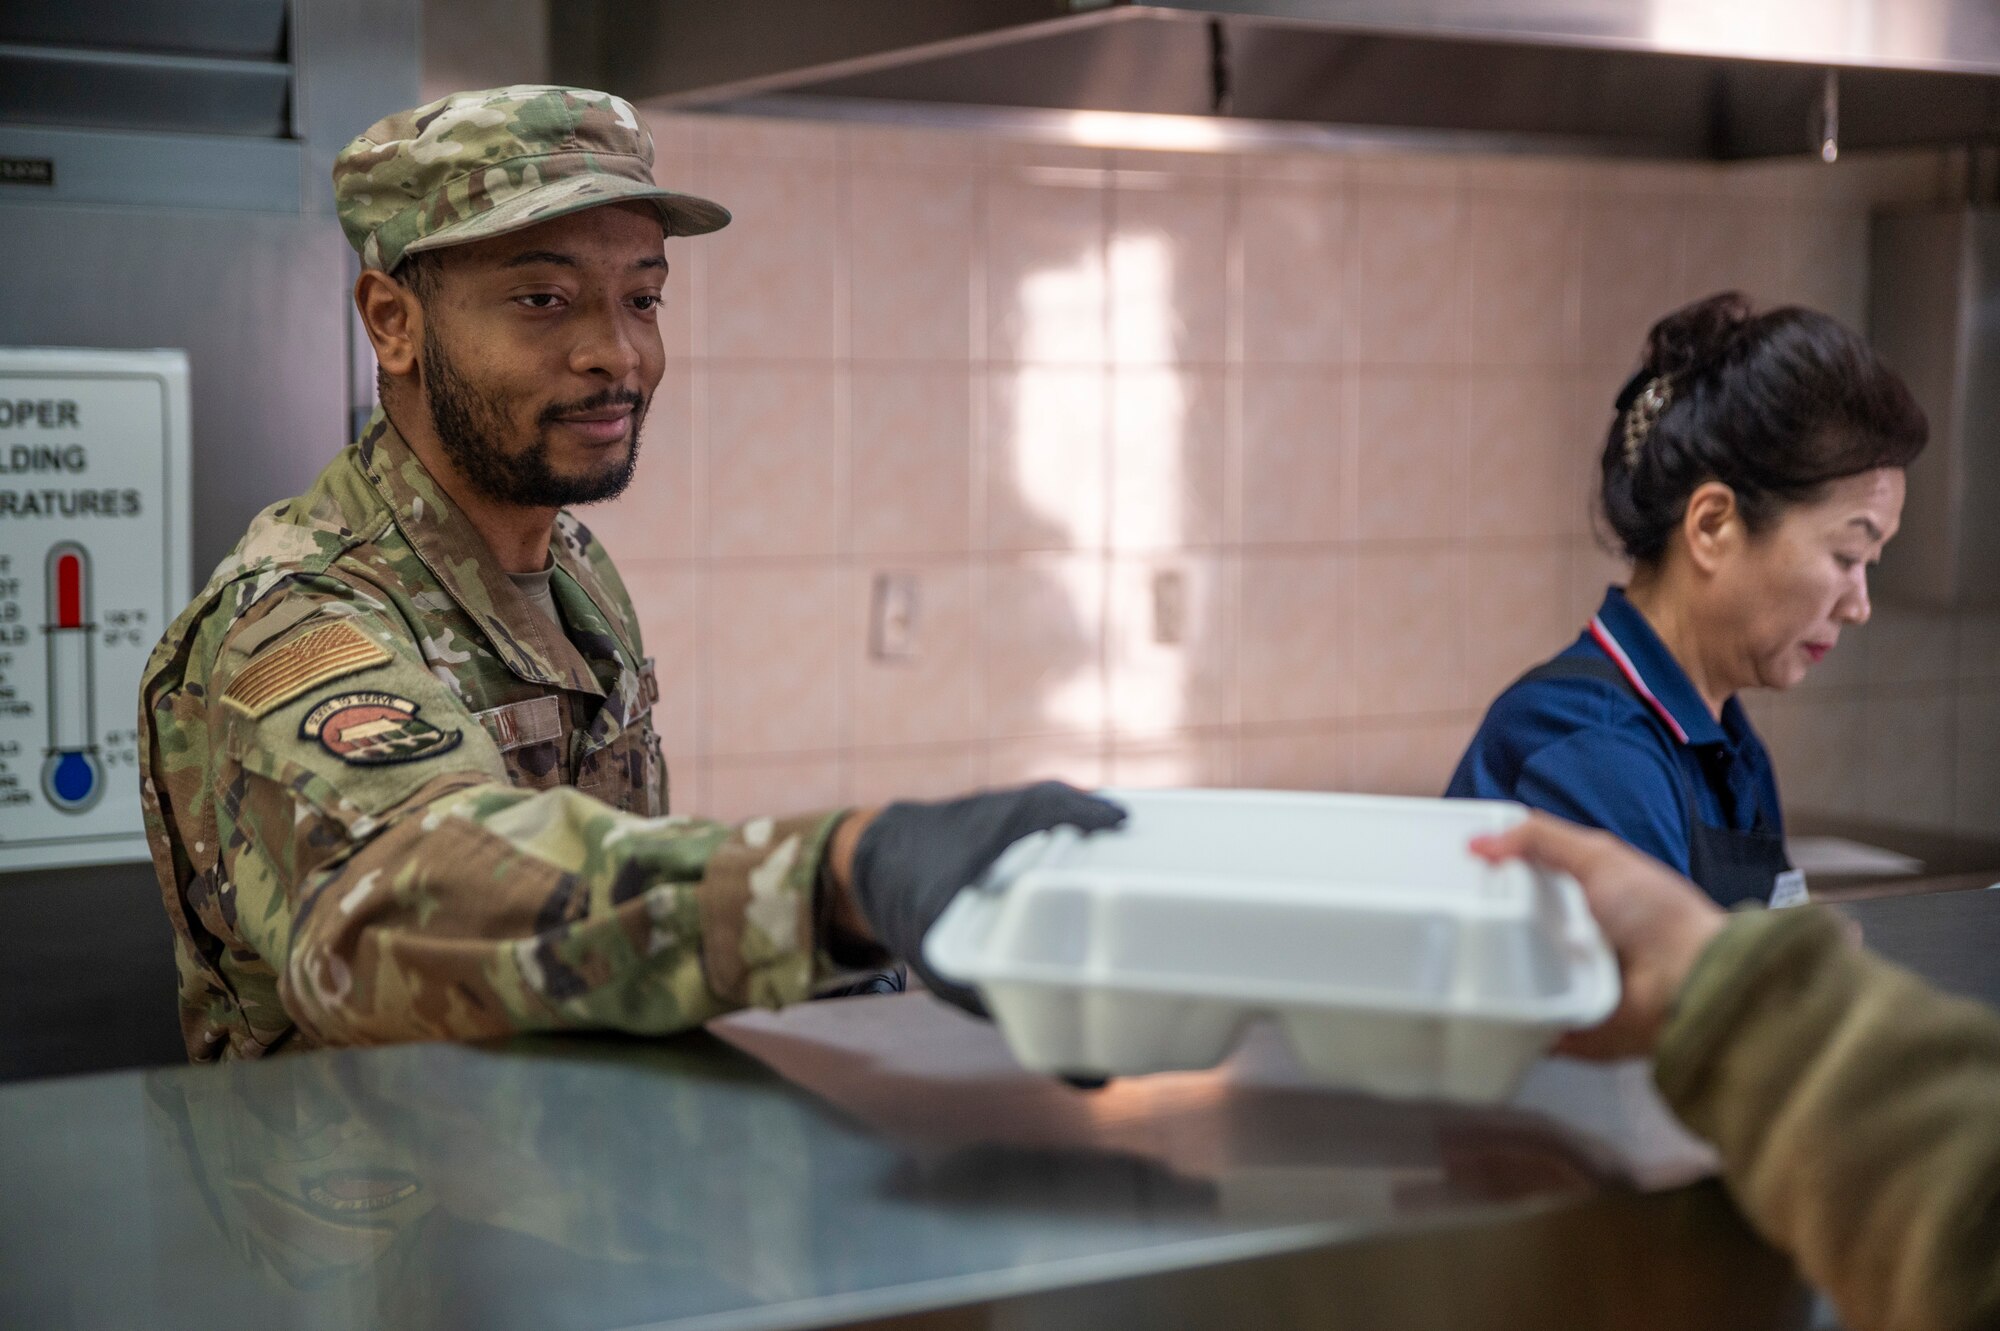 U.S. Air Force Senior Airman Trevor Allen, 51st Force Support Squadron food services journeyman, serves food at the flight line dining facility on Osan Air Base, Republic of Korea, Jan. 8, 2024. The facility supports the 51st Fighter Wing mission by providing breakfast, lunch, and dinner to more than 300 personnel daily, allowing them to replenish and continue to accomplish critical tasks. (U.S. Air Force photo by Senior Airman Trevor Gordnier)